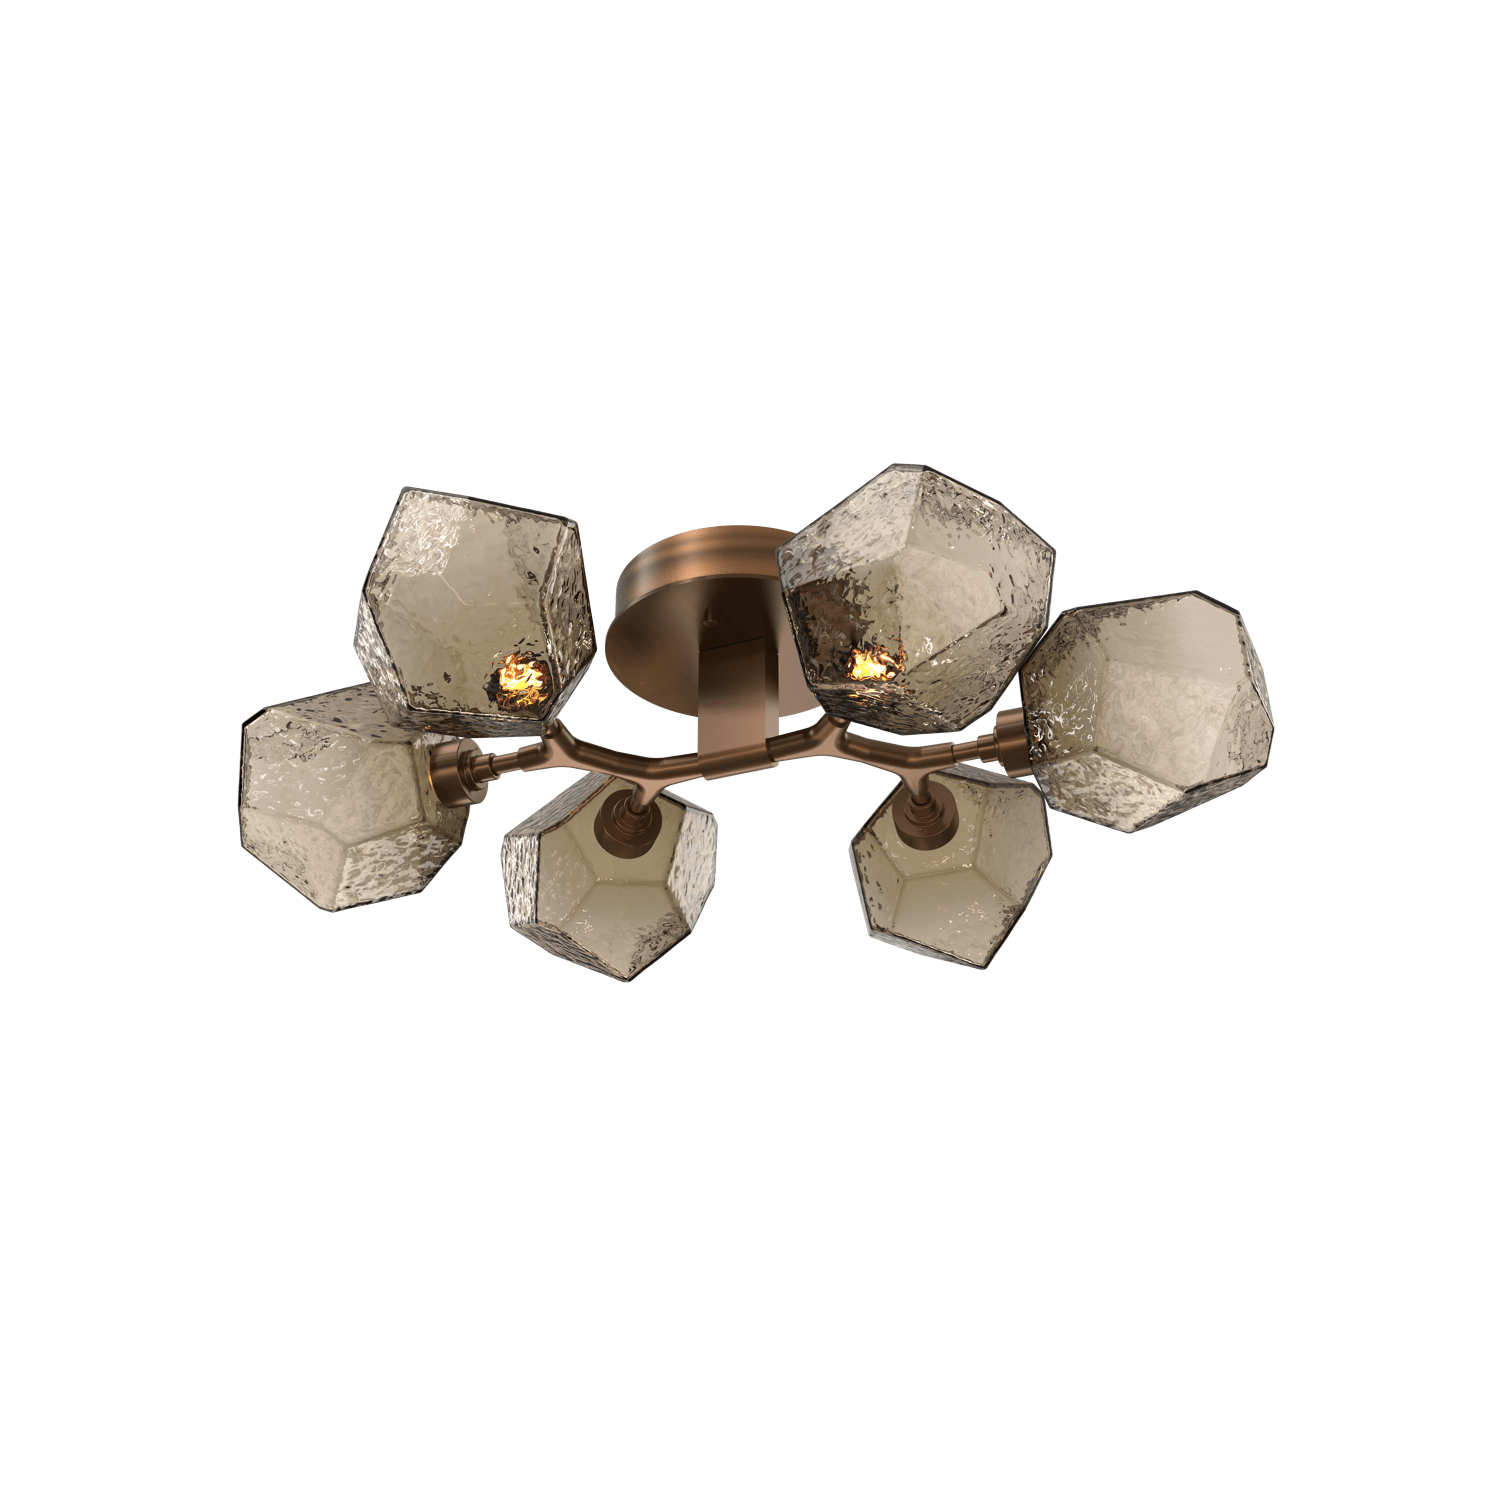 CLB0039-01-RB-B-Hammerton-Studio-Gem-6-light-organic-flush-mount-light-with-oil-rubbed-bronze-finish-and-bronze-blown-glass-shades-and-LED-lamping